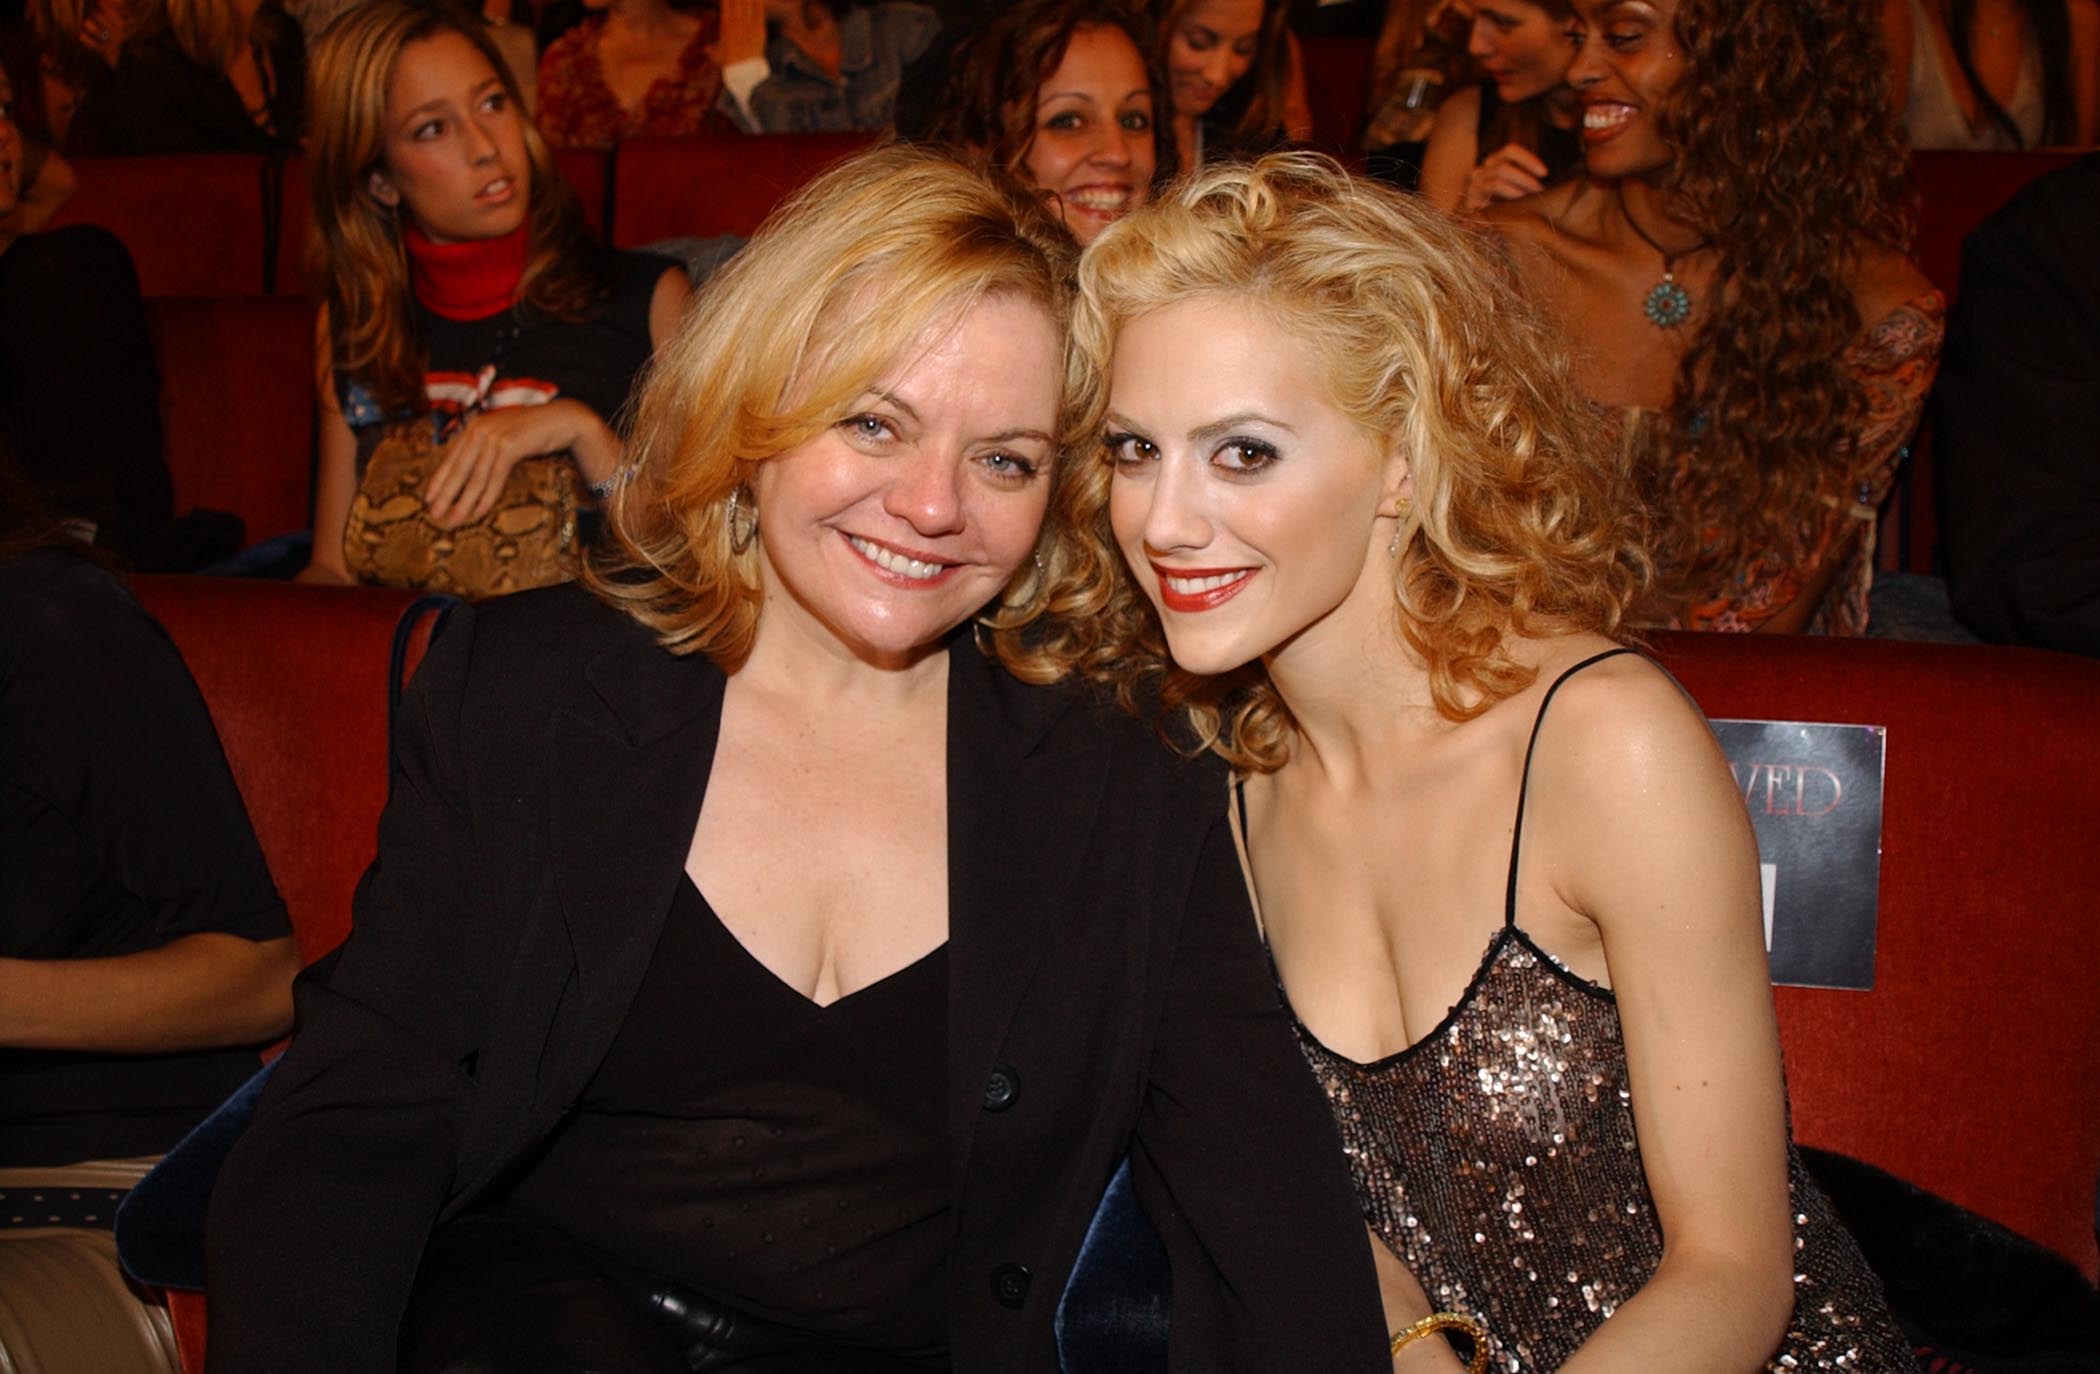 Sharon Murphy and Brittany Murphy at the 2002 VH1 Vogue Fashion Awards at Radio City Music Hall in New York City. | Source: Getty Images